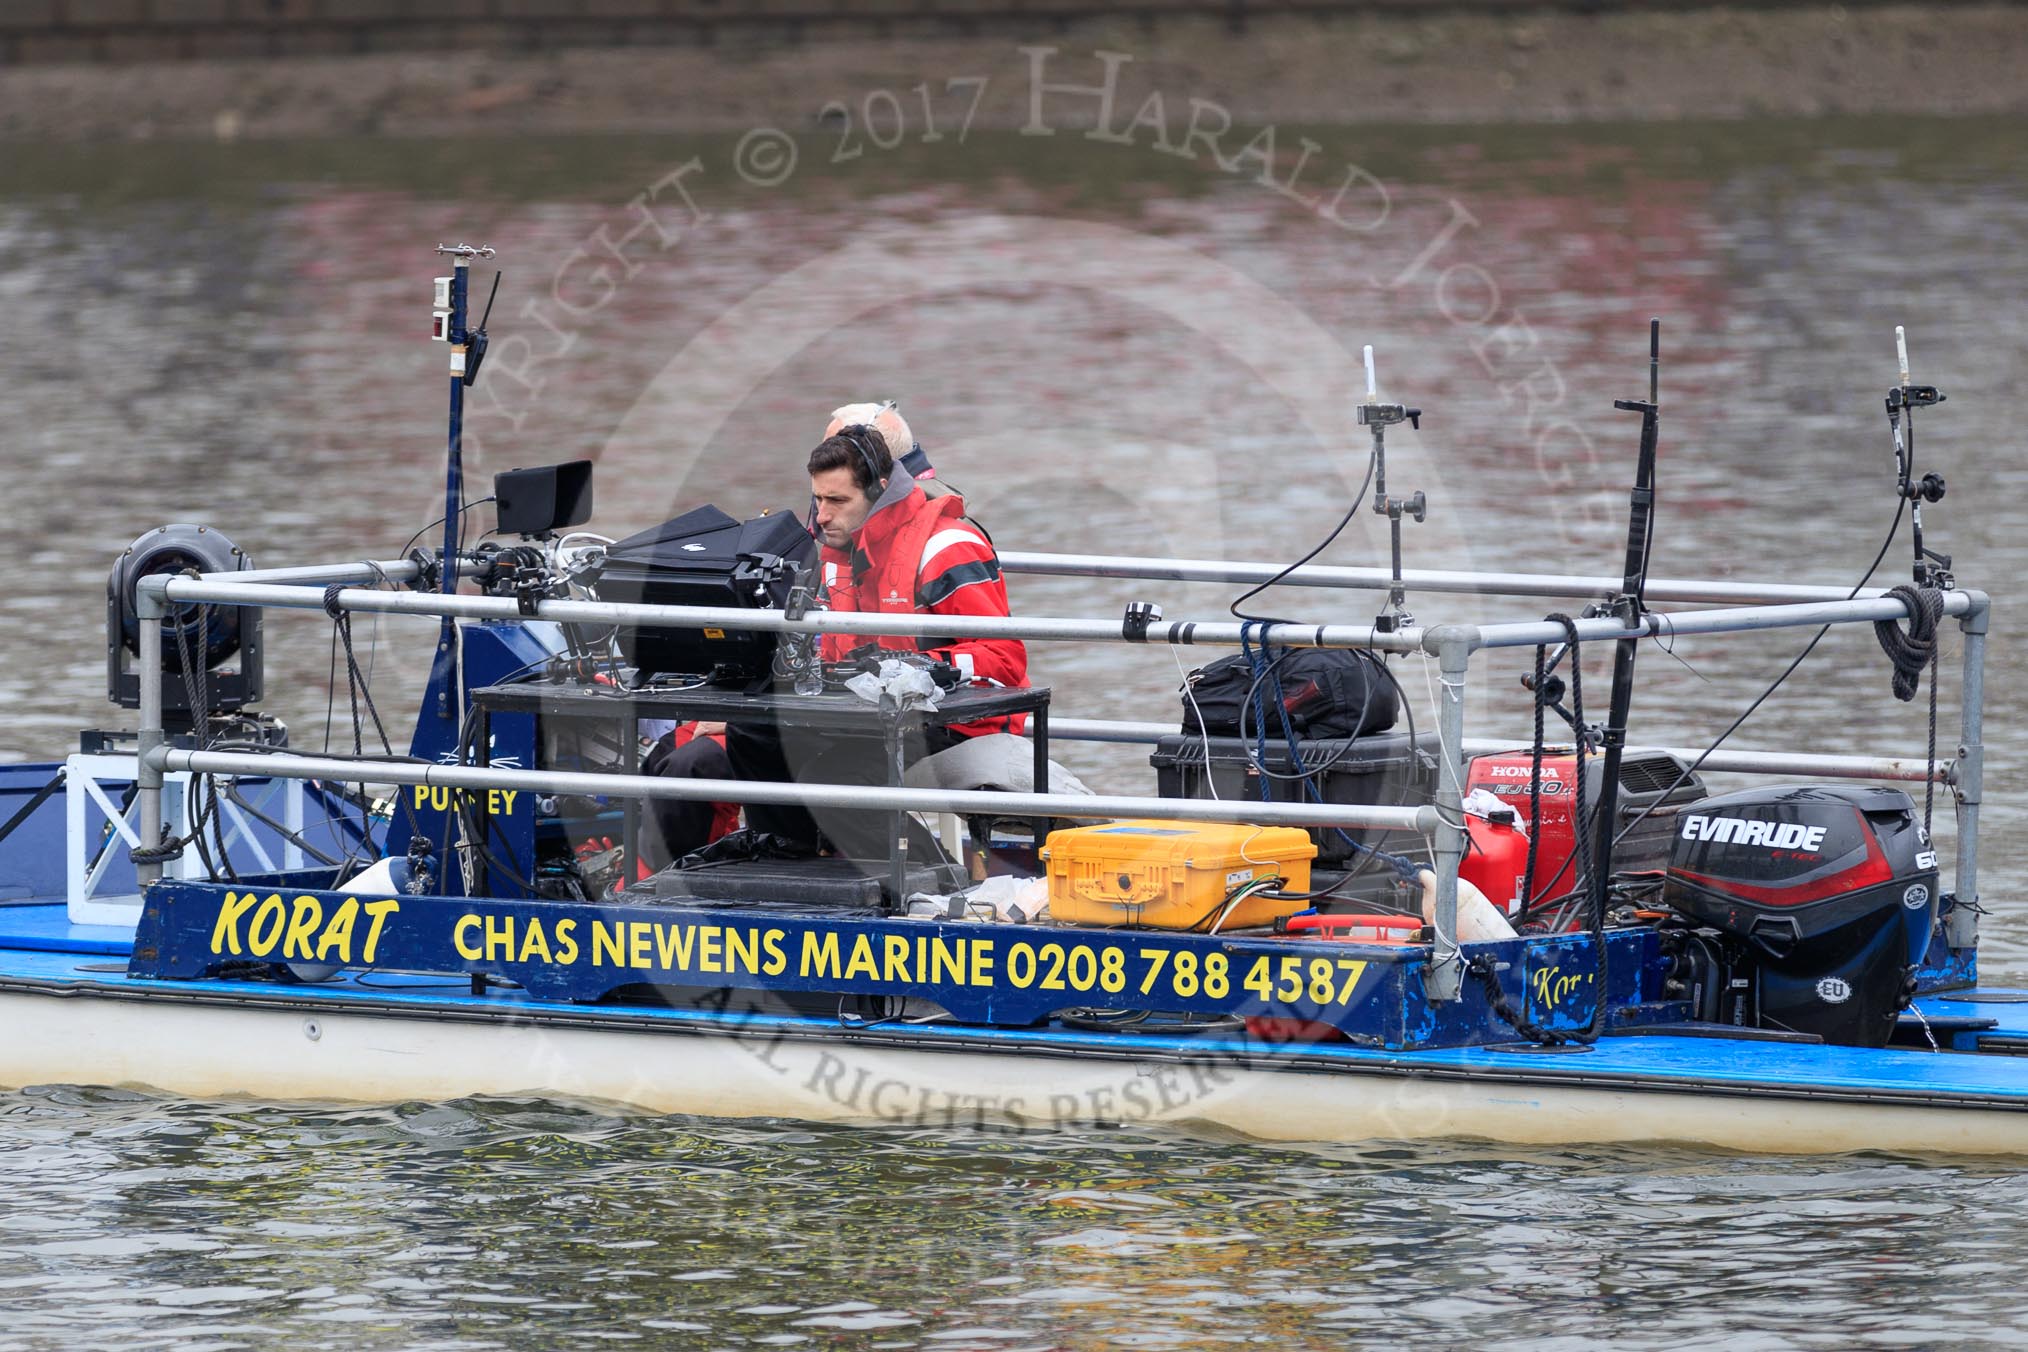 The Cancer Research UK Women's Boat Race 2018: The Chas Newens Marine catamaran "Korat", used as a camera platform for BBC Sport.
River Thames between Putney Bridge and Mortlake,
London SW15,

United Kingdom,
on 24 March 2018 at 15:30, image #83